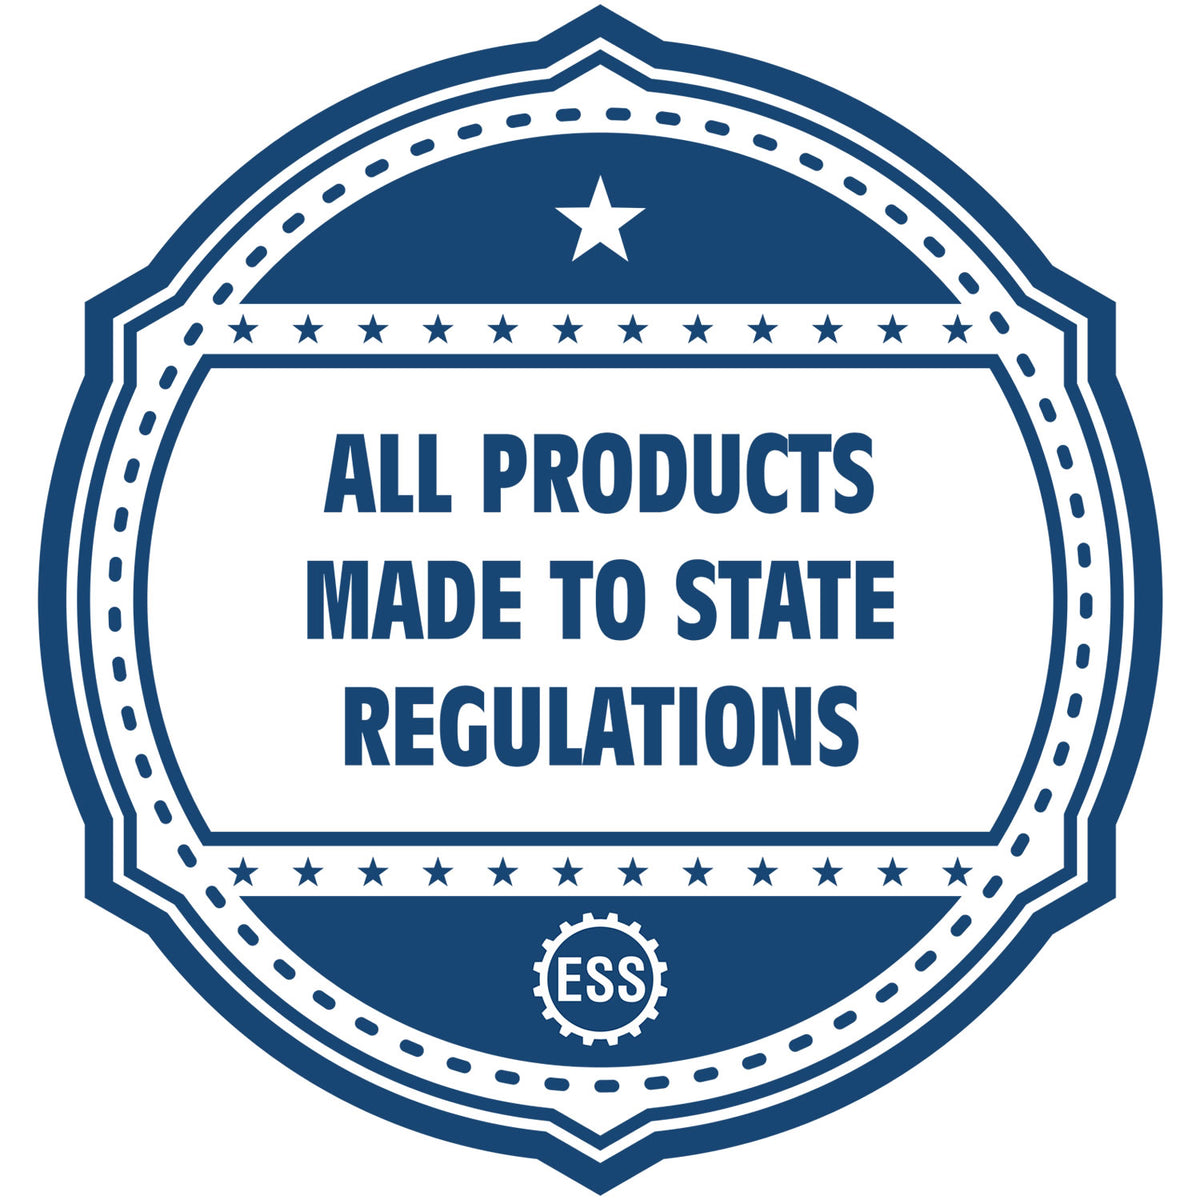 A blue icon or badge for the Gift Utah Engineer Seal showing that this product is made in compliance with state regulations.